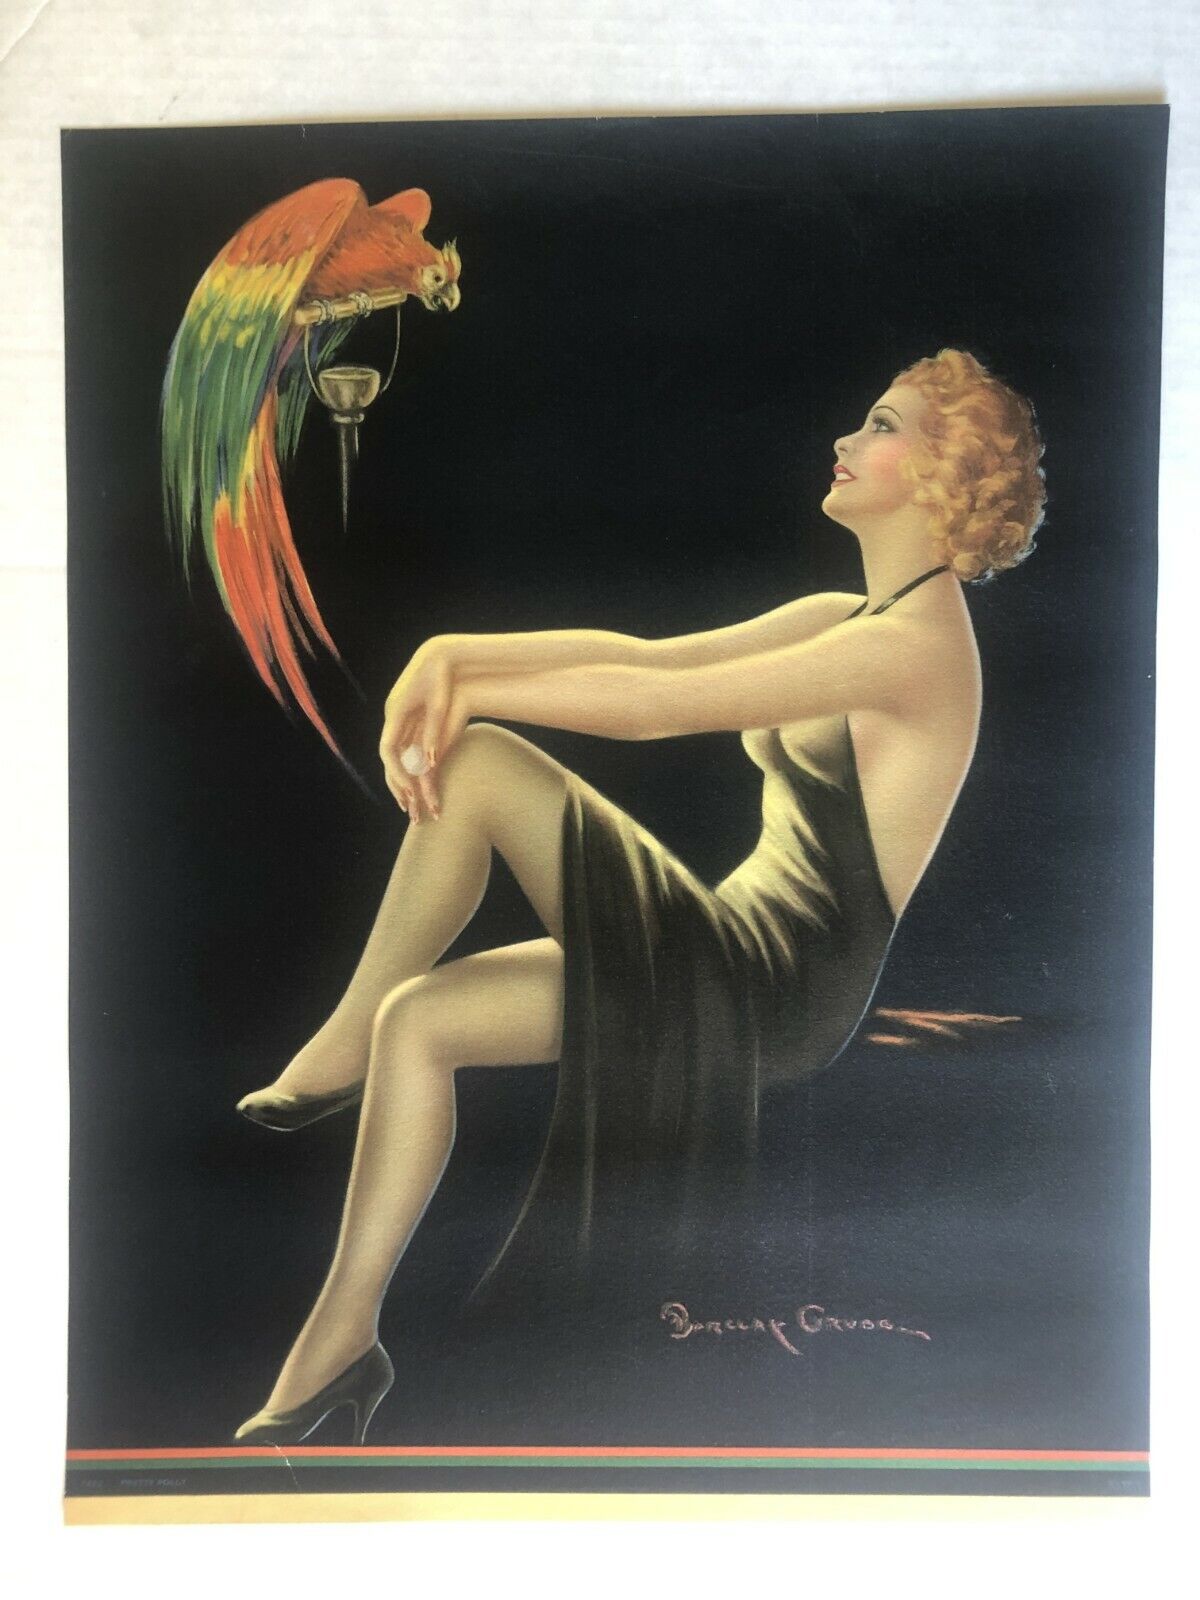 Beautiful 1938 Pinup Girl Picture by Barclay Grubben- Blond Woman w/ Parrot